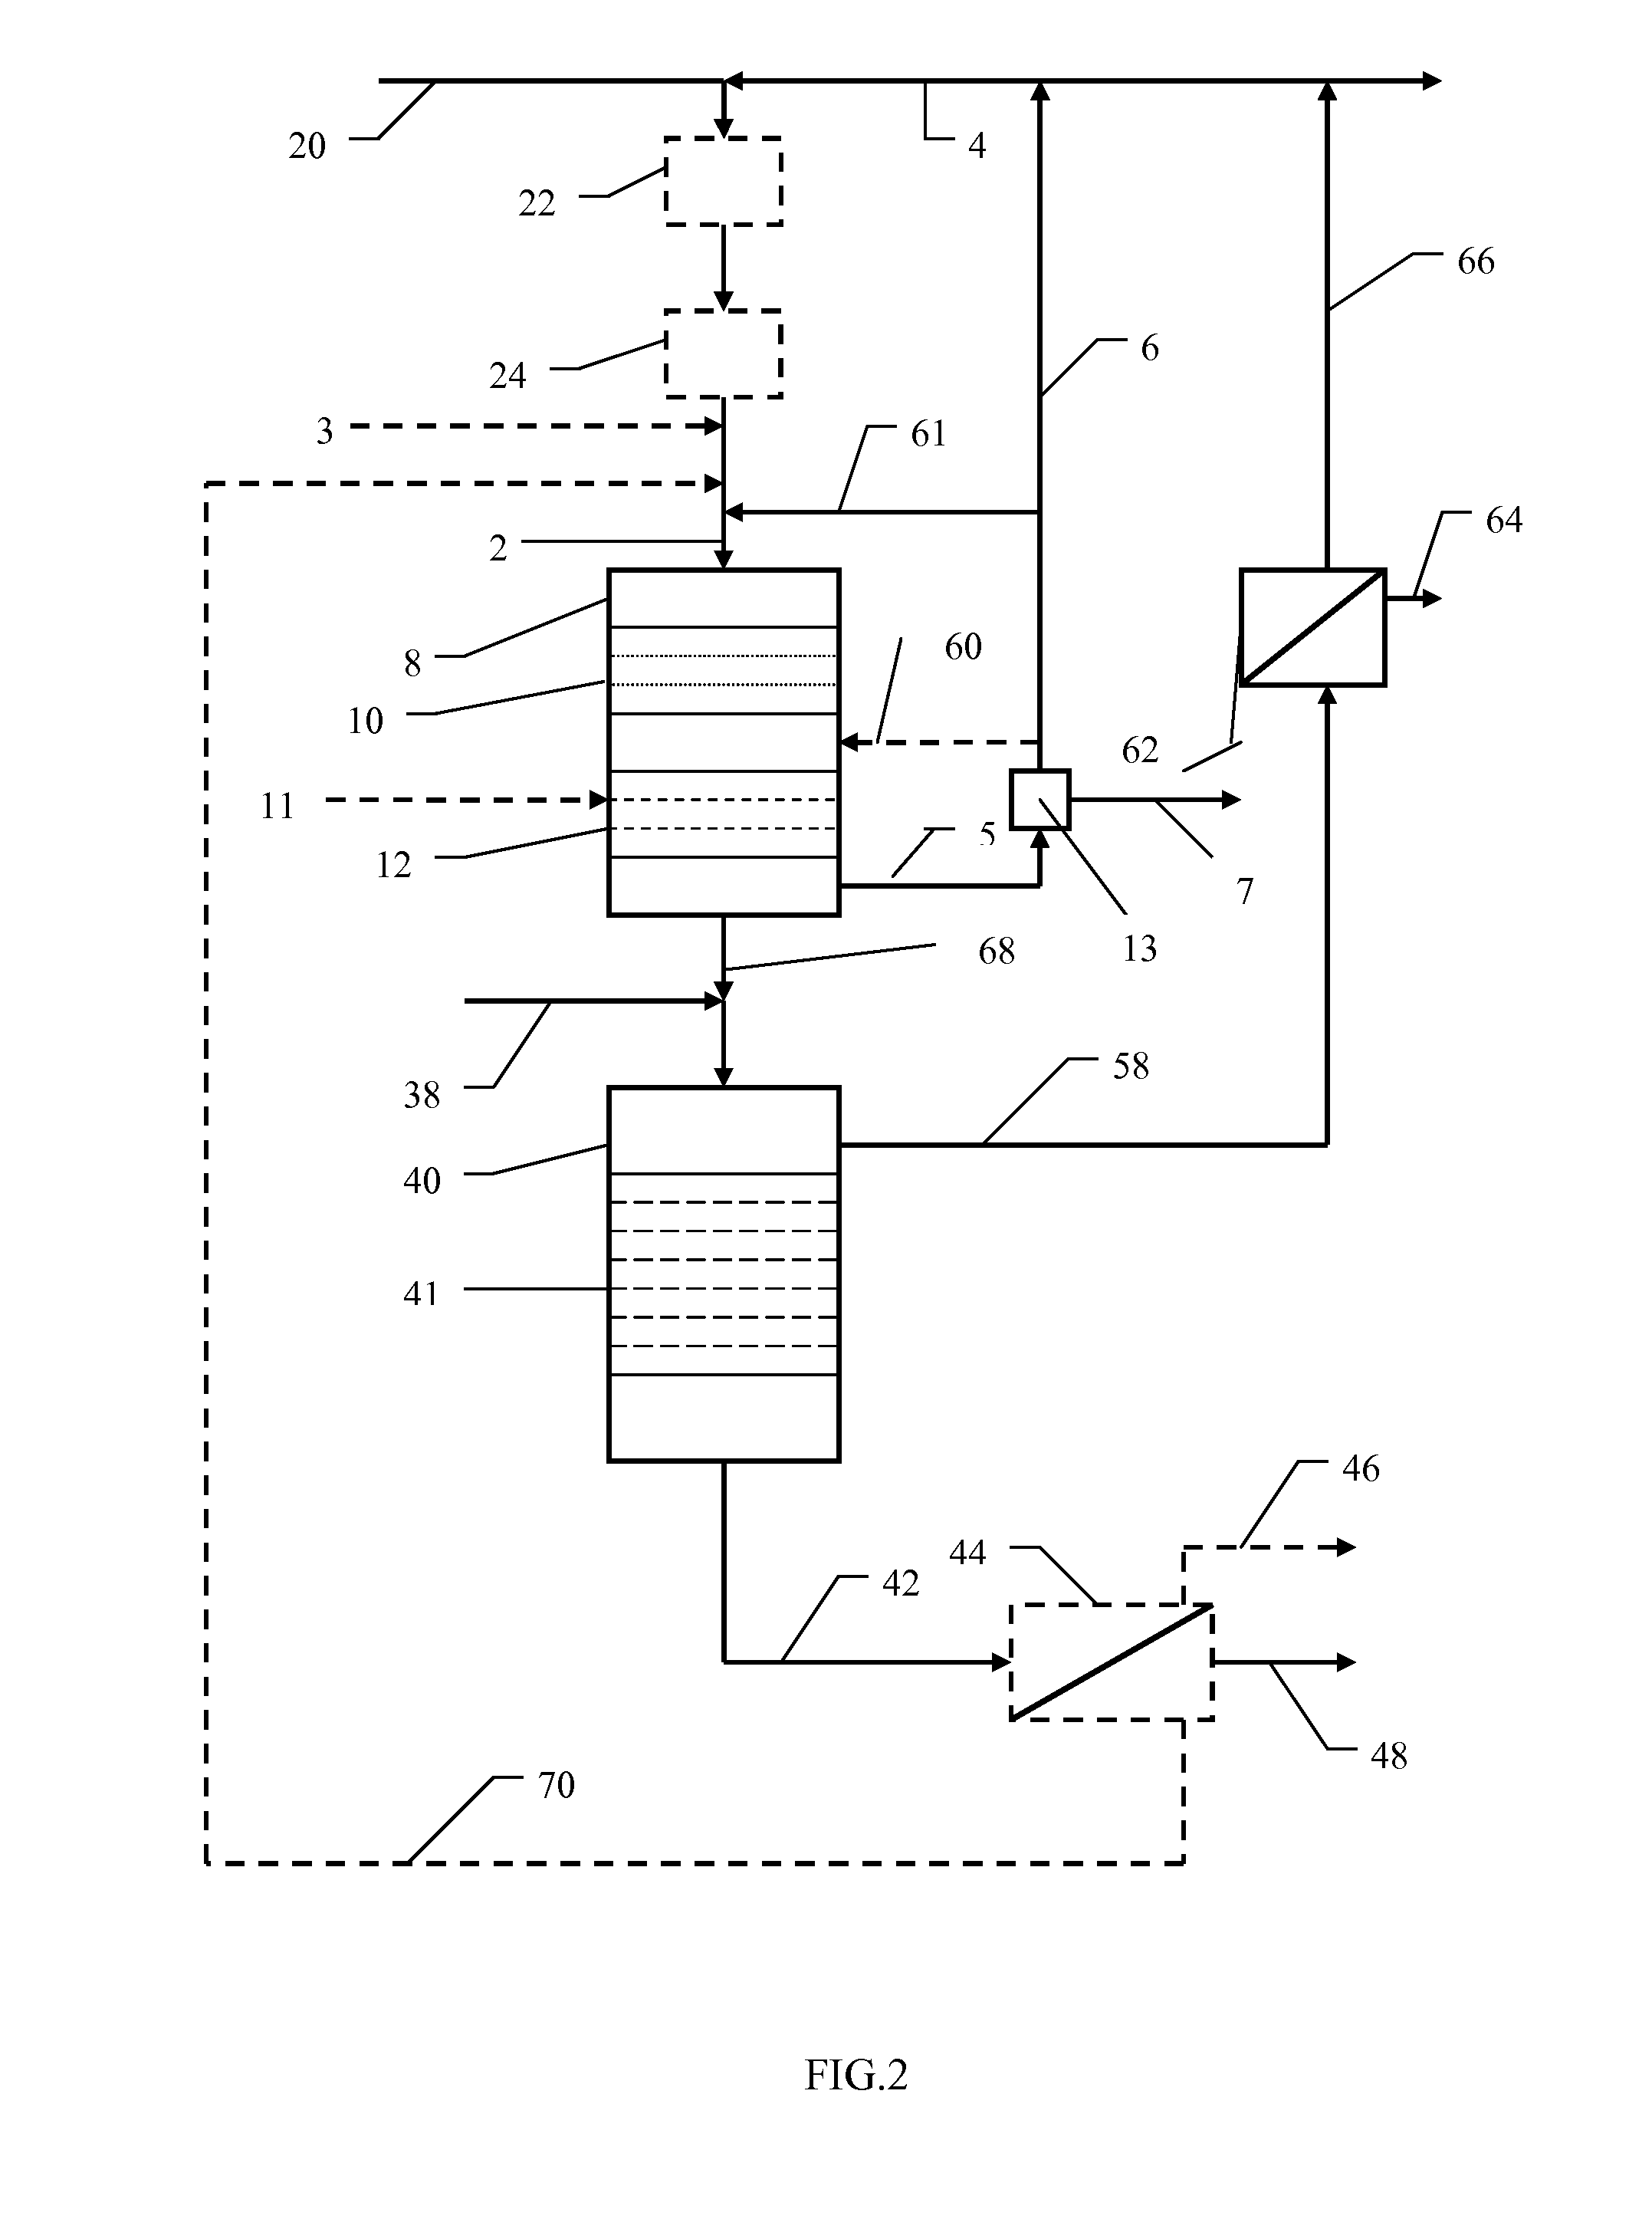 Process and apparatus for producing fuel from a biological origin through a single hydroprocessing step in the presence of a niw catalyst